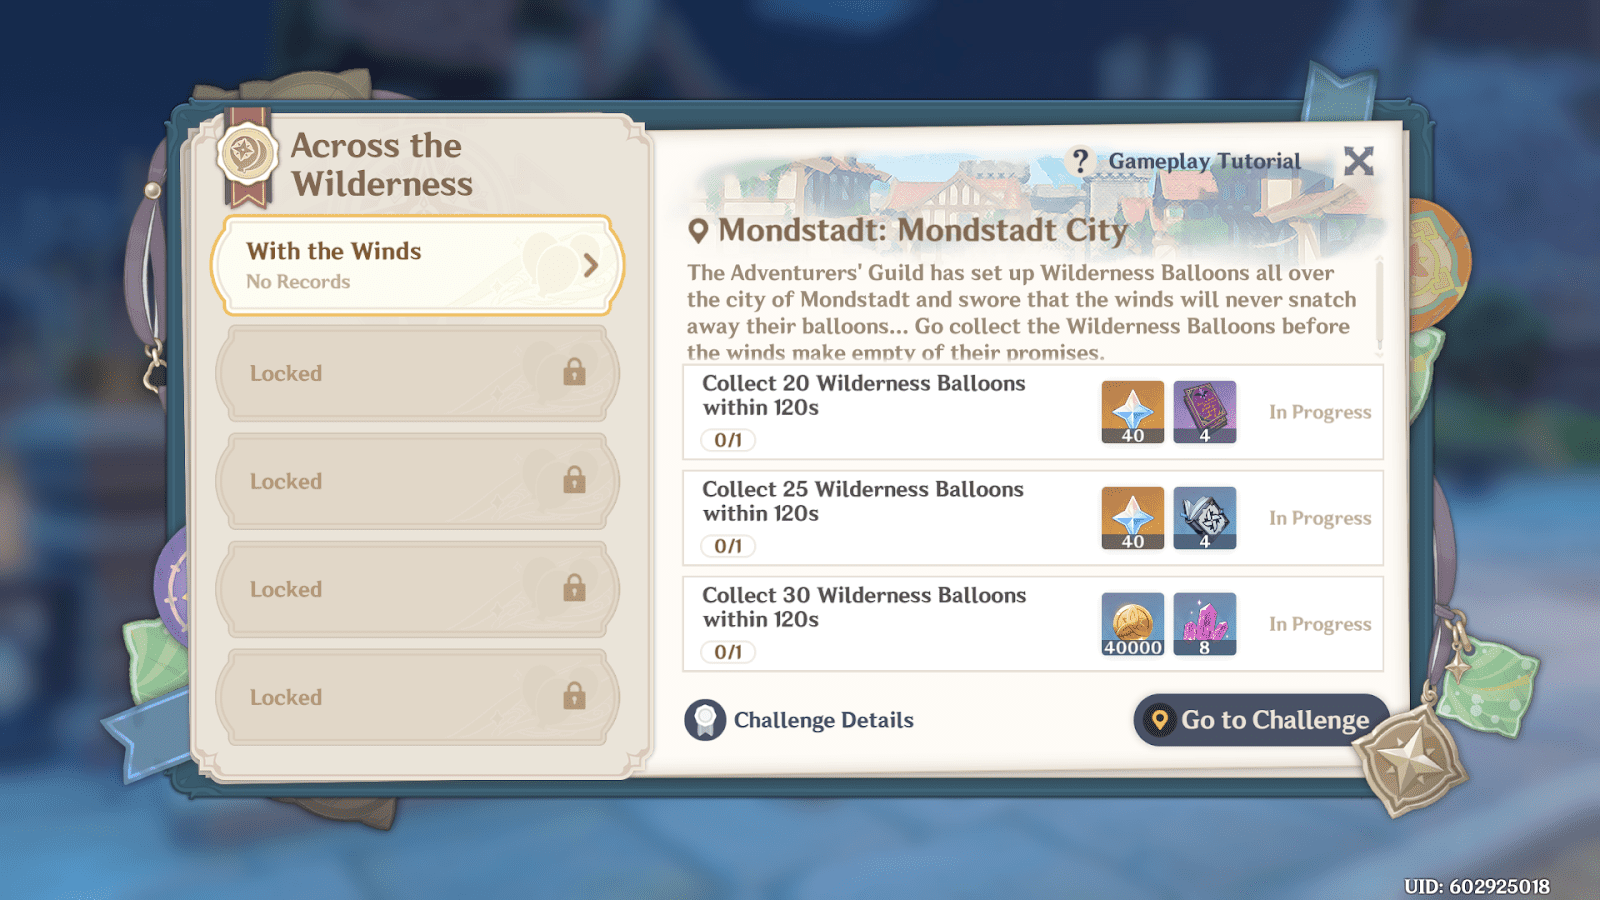 Rewards Per Stage Across the wilderness event